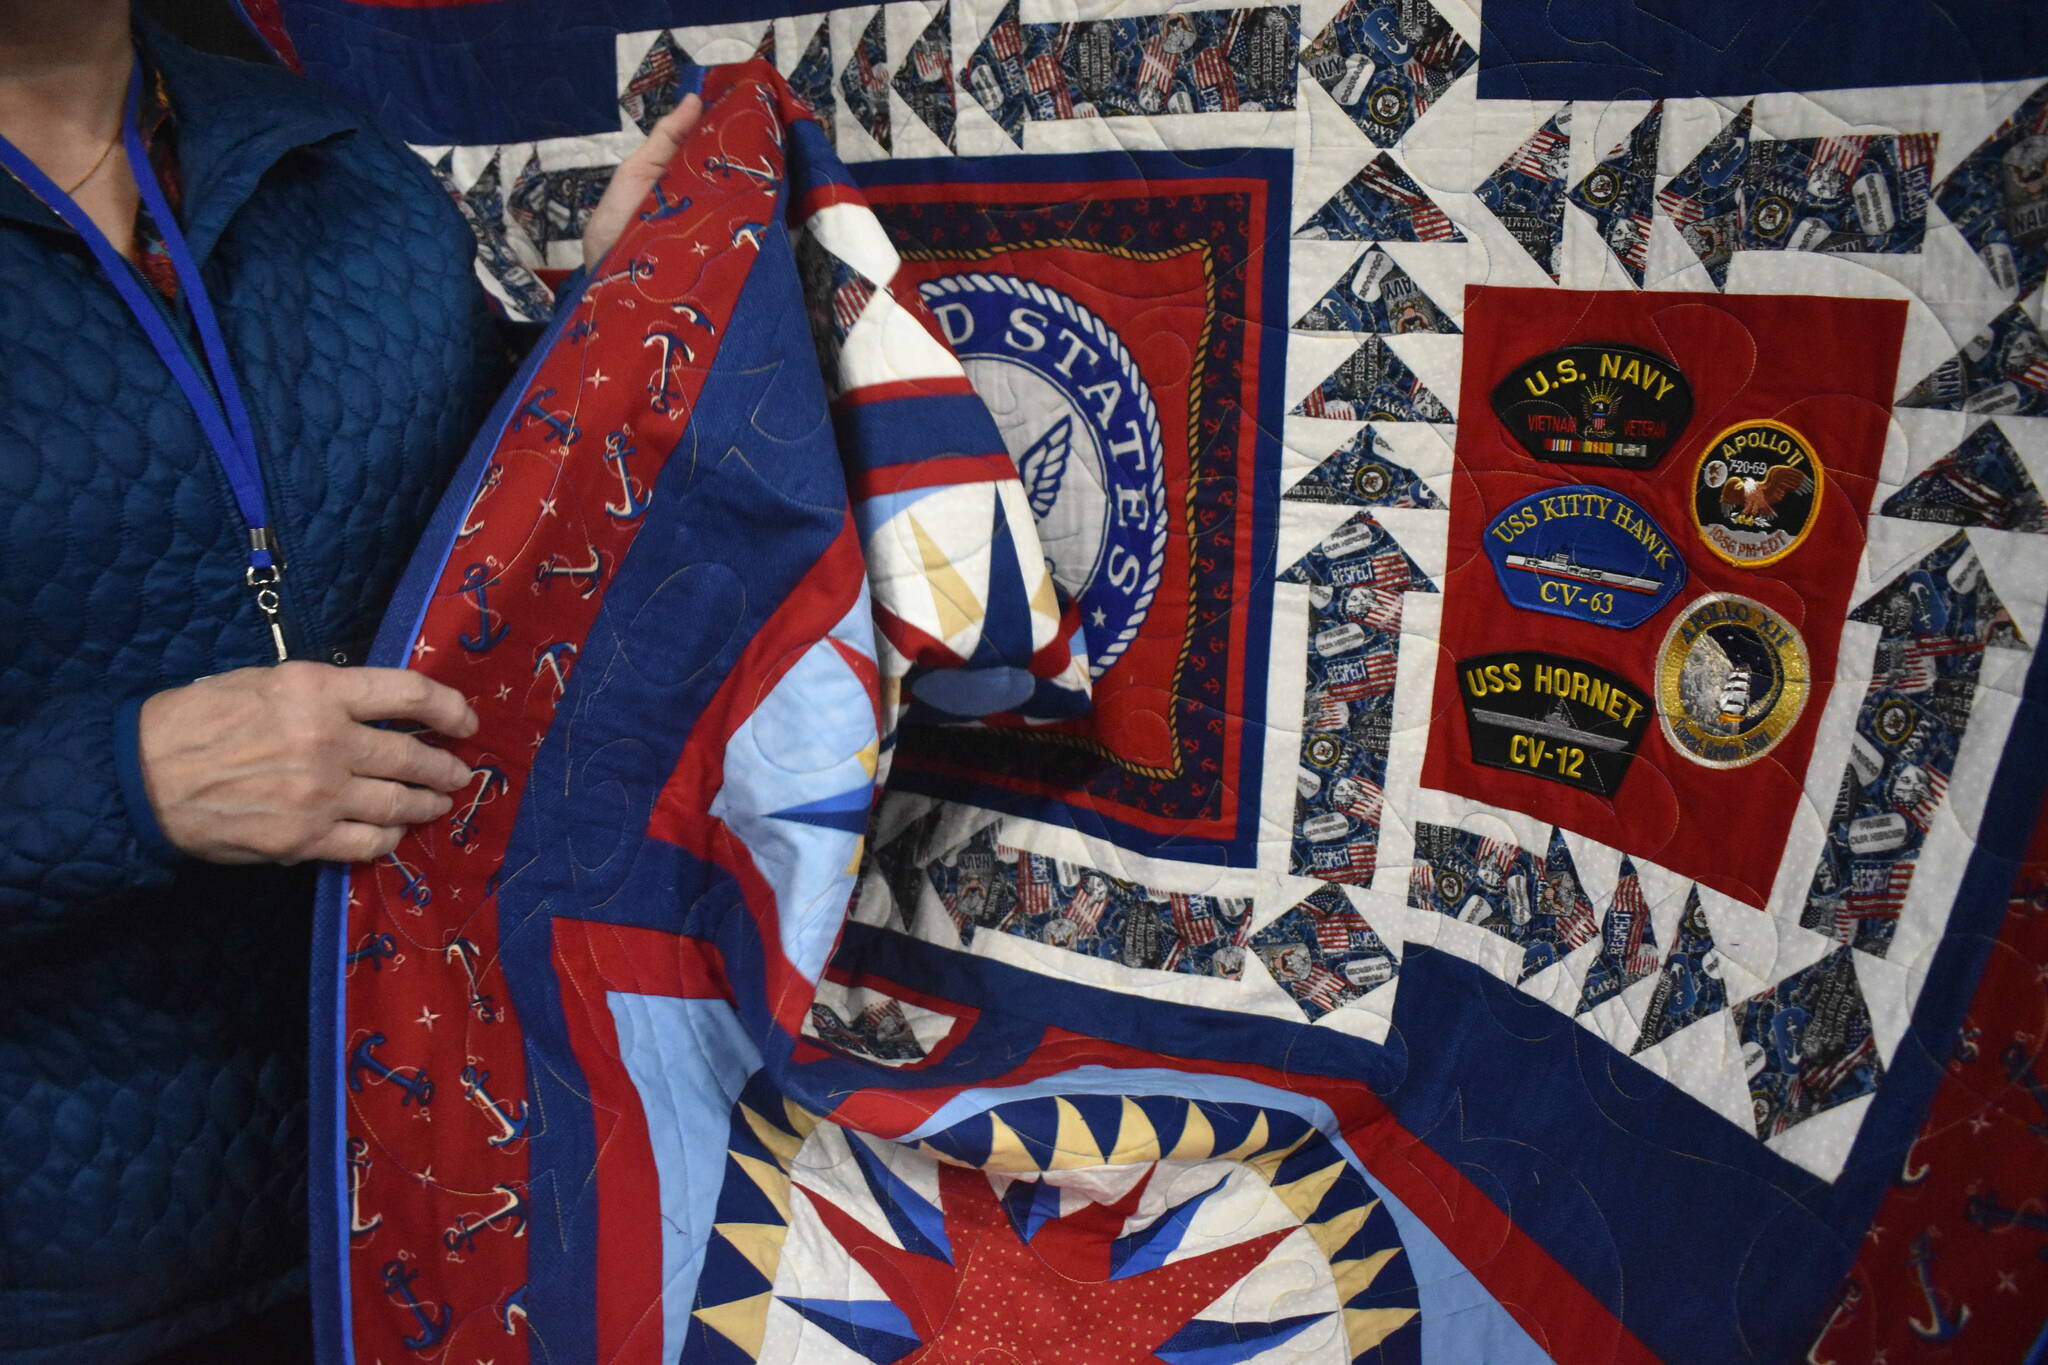 Pictured is Susanne Wick’s Quilt of Valor for her husband Robert Wick, commemorating his service in the U.S. Navy with real patches. Photo by Alex Bruell